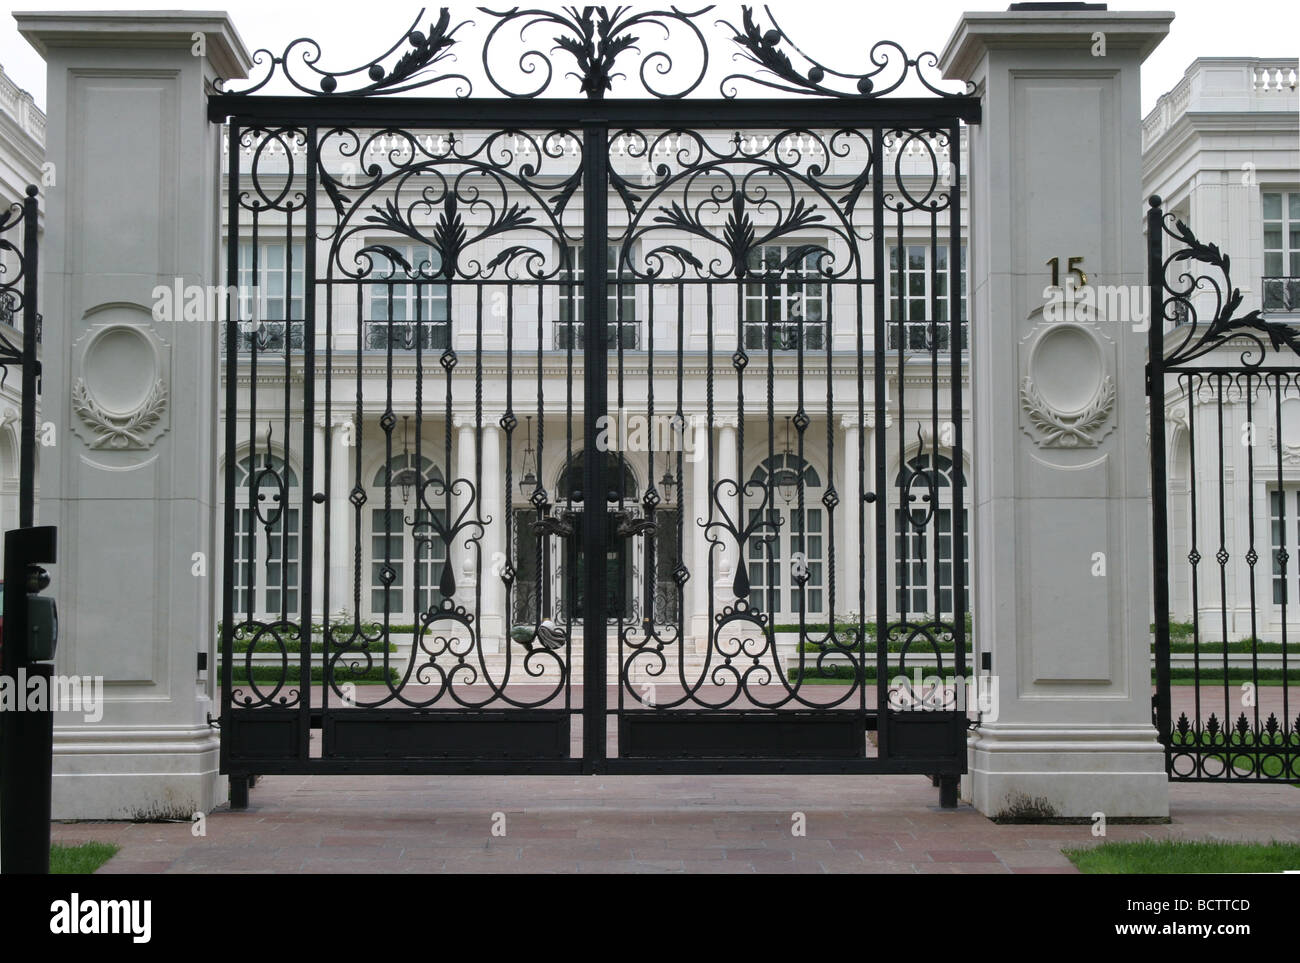 entrance and gate in front of luxurious mansion Stock Photo